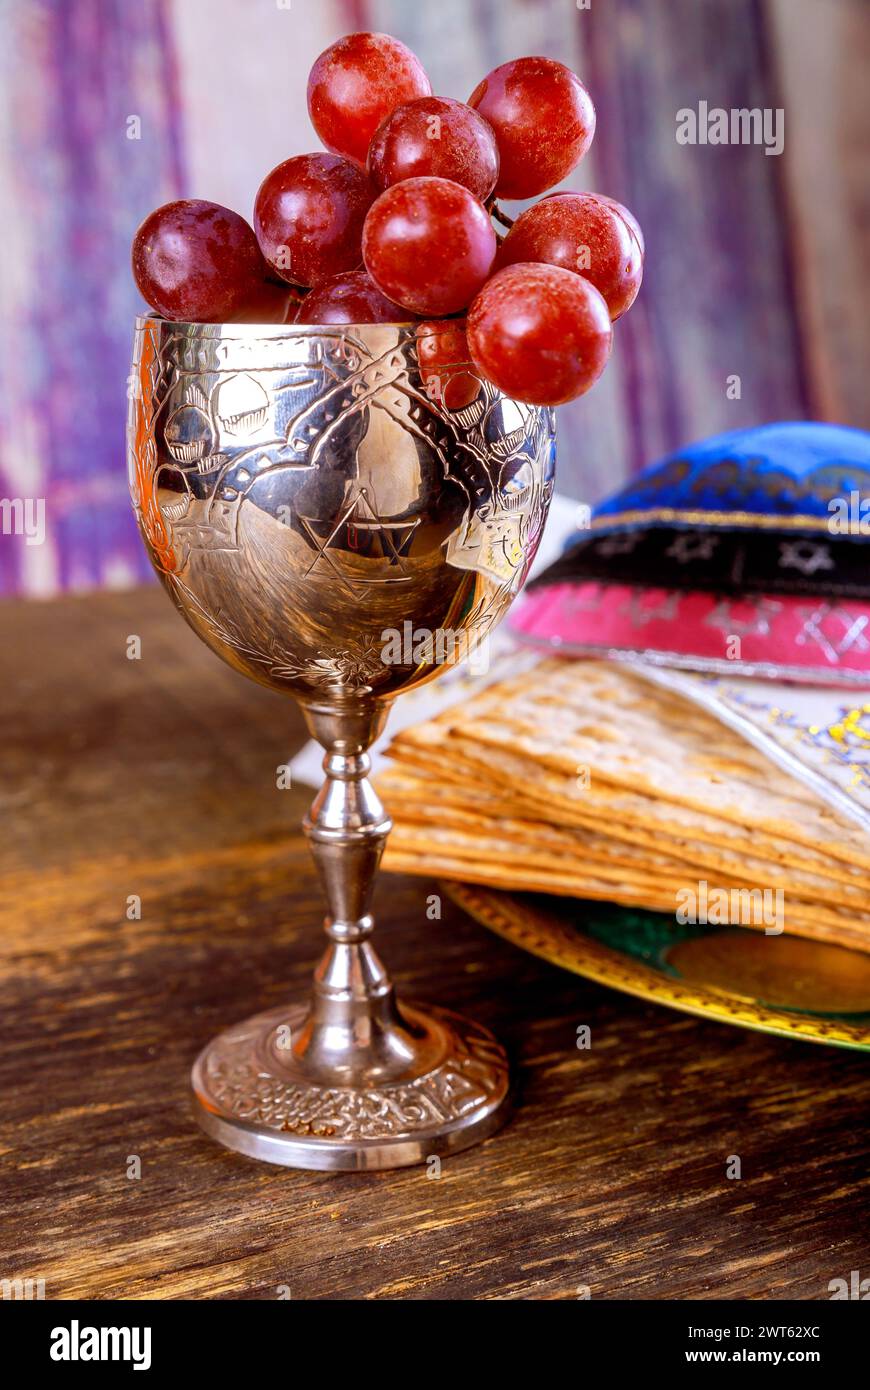 Jewish matzah unleavened bread, wine cup with Passover holiday attributes Stock Photo